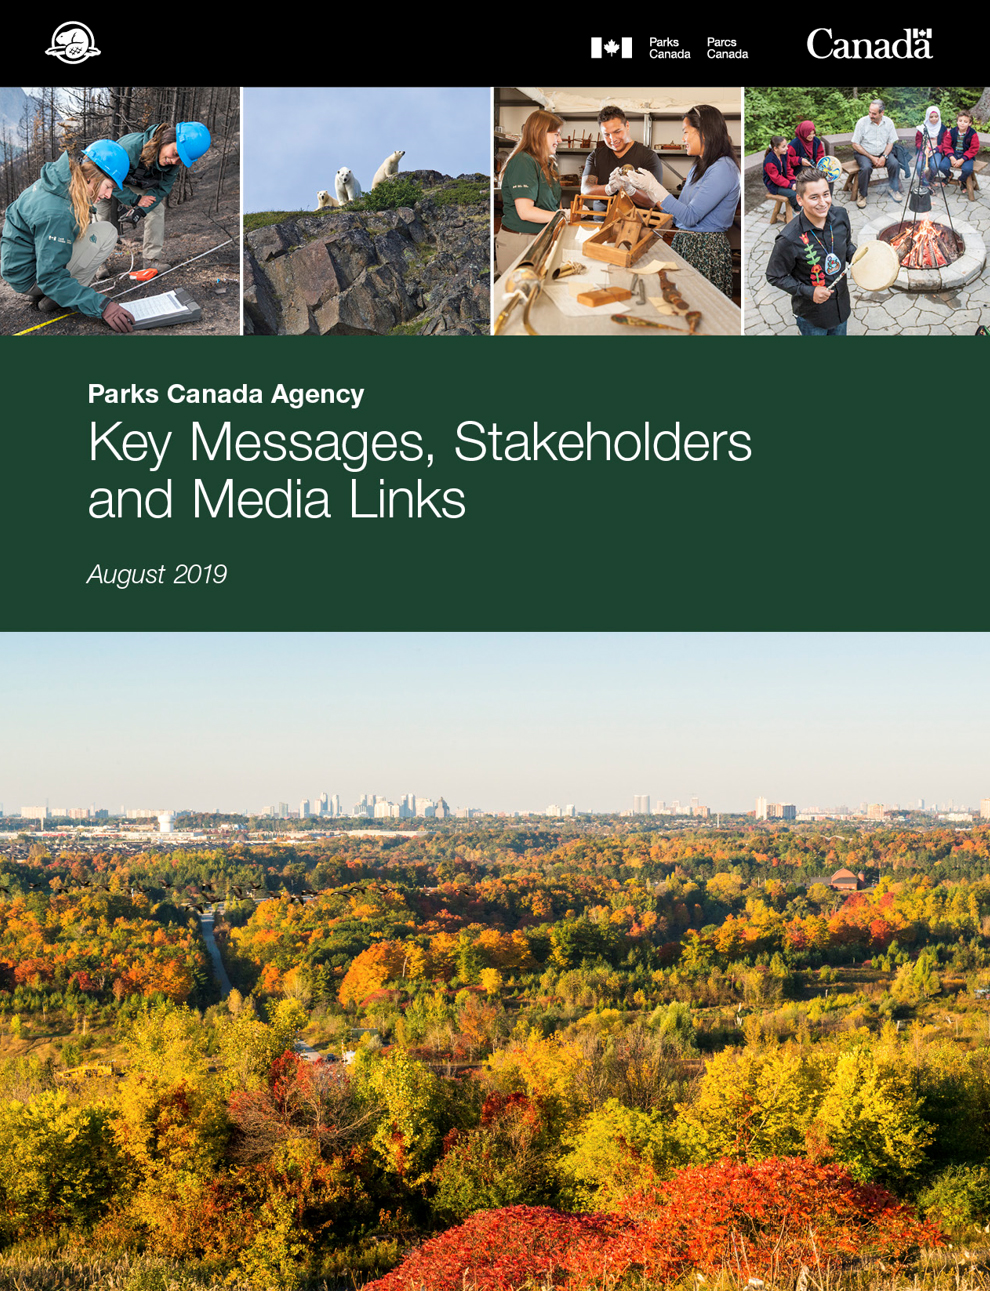 Five images: Two Parks Canada staff at a burn site. Three polar bears. Three people handling artifacts. A group of people with hand drums. An urban forest. A green rectangle with white text that says: Parks Canada Agency Key Messages, Stakeholders and Media Links August 2019.
